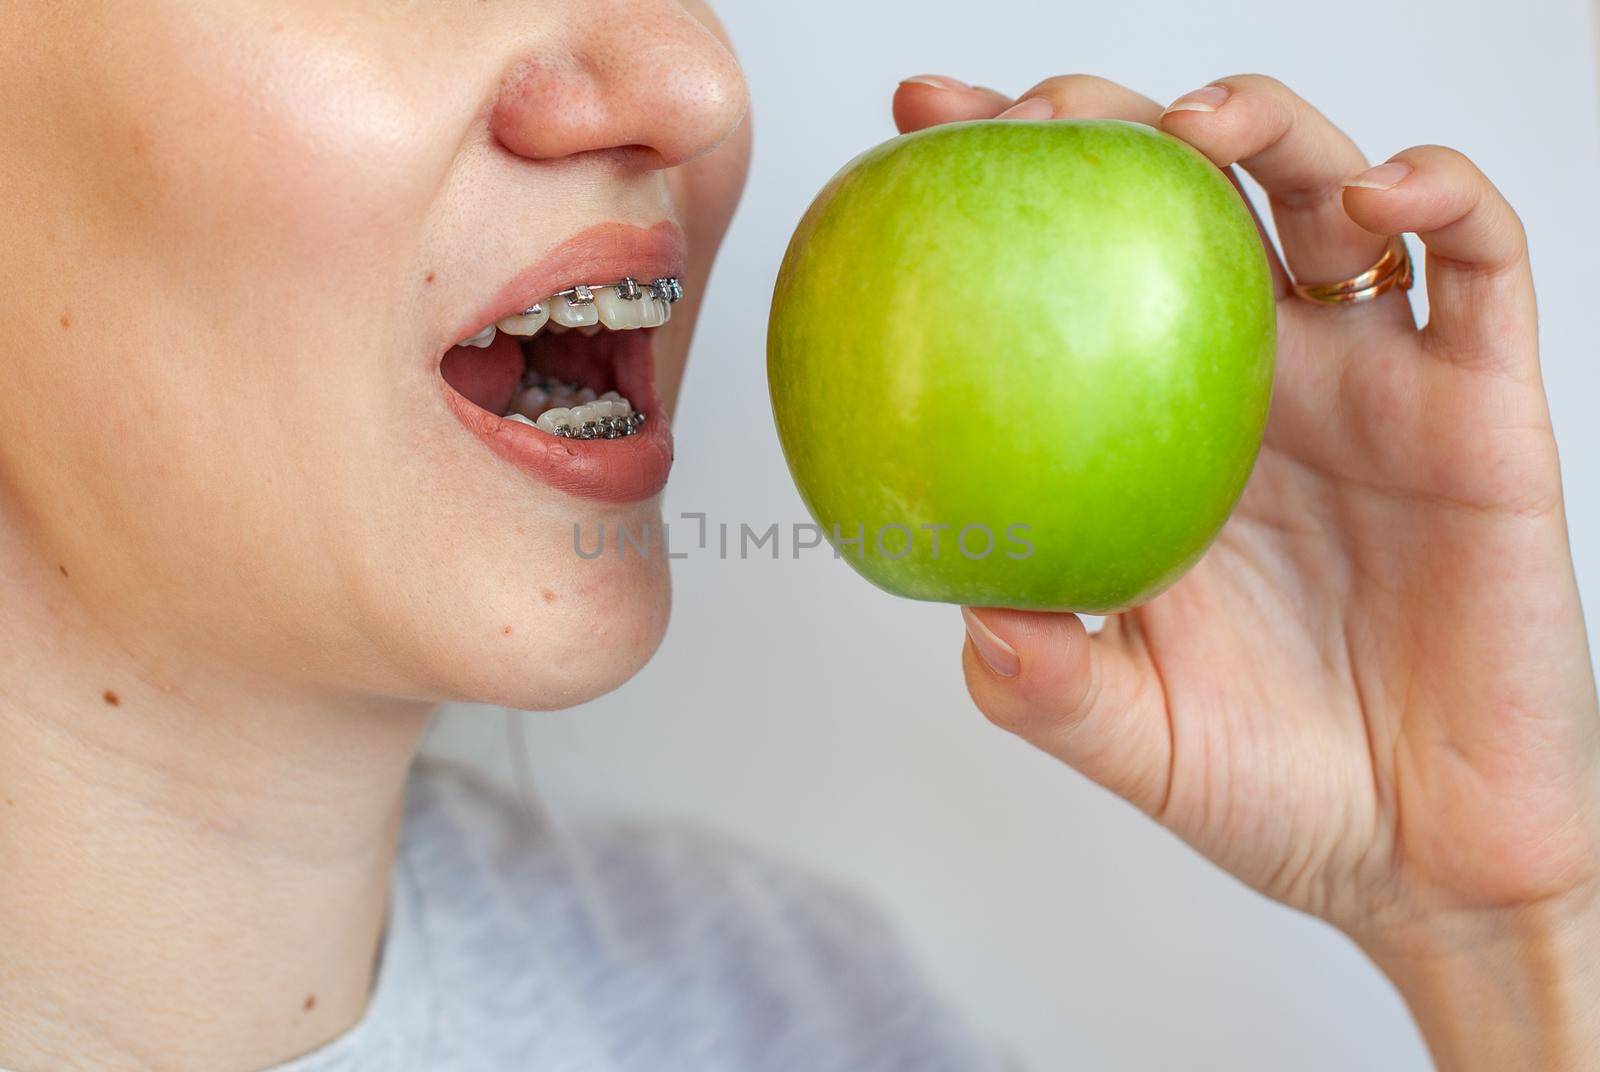 A girl with braces on her teeth wants to bite a green apple. Close-up photos of teeth and lips. Smooth teeth from braces. Photo on a light solid background.